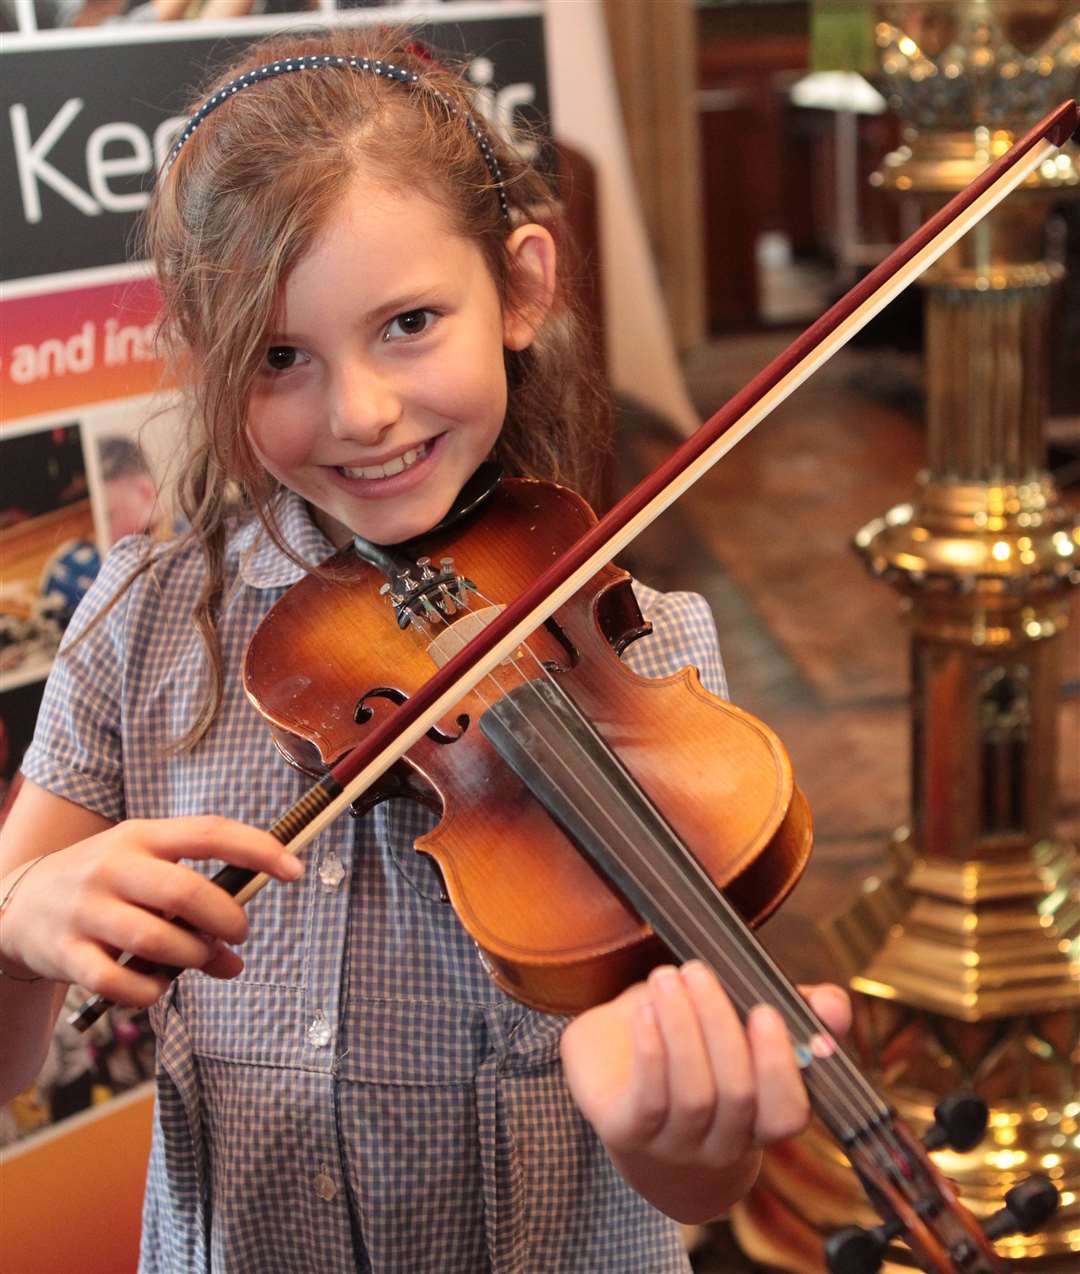 Rachel plays the violin last year as part of the festival's performance of The Great Enormo Picture: John Westhrop